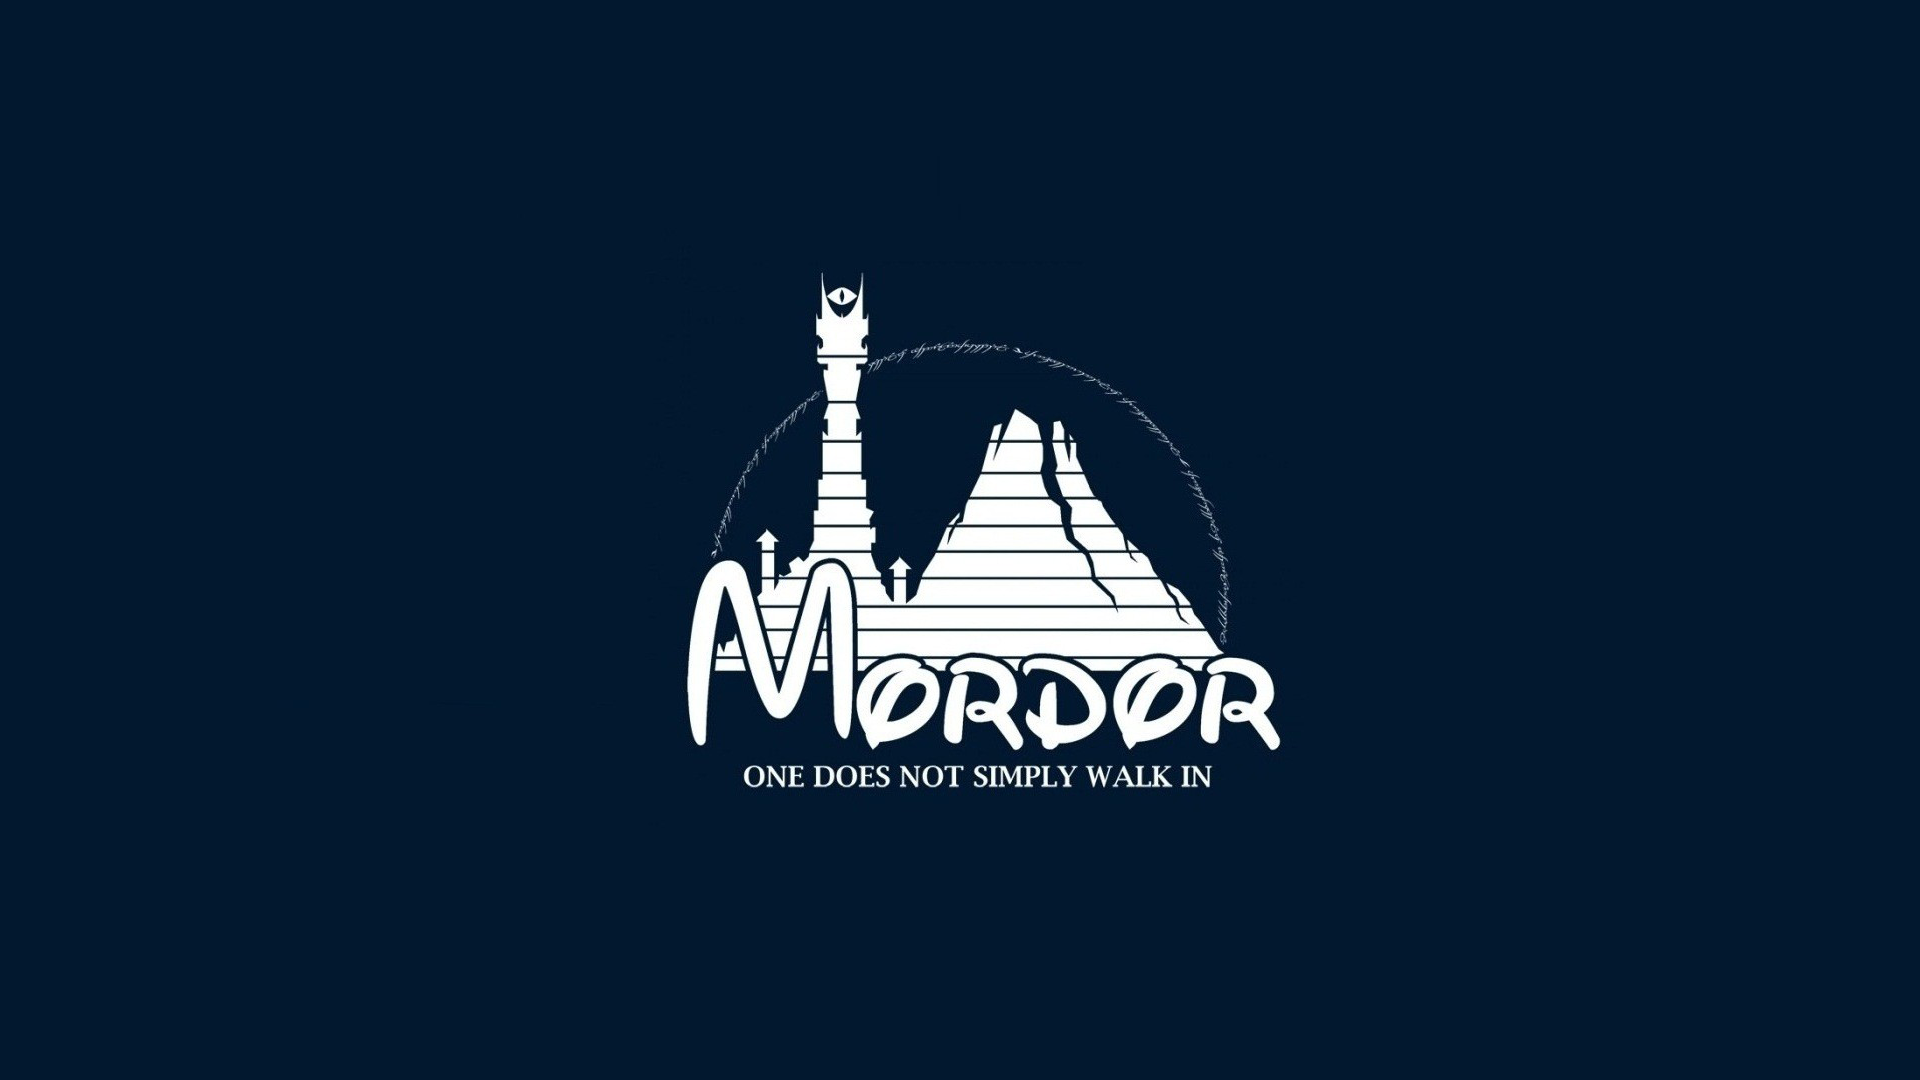 General 1920x1080 humor Middle-earth: Mordor minimalism Walt Disney The Lord of the Rings Mordor text blue blue background simple background